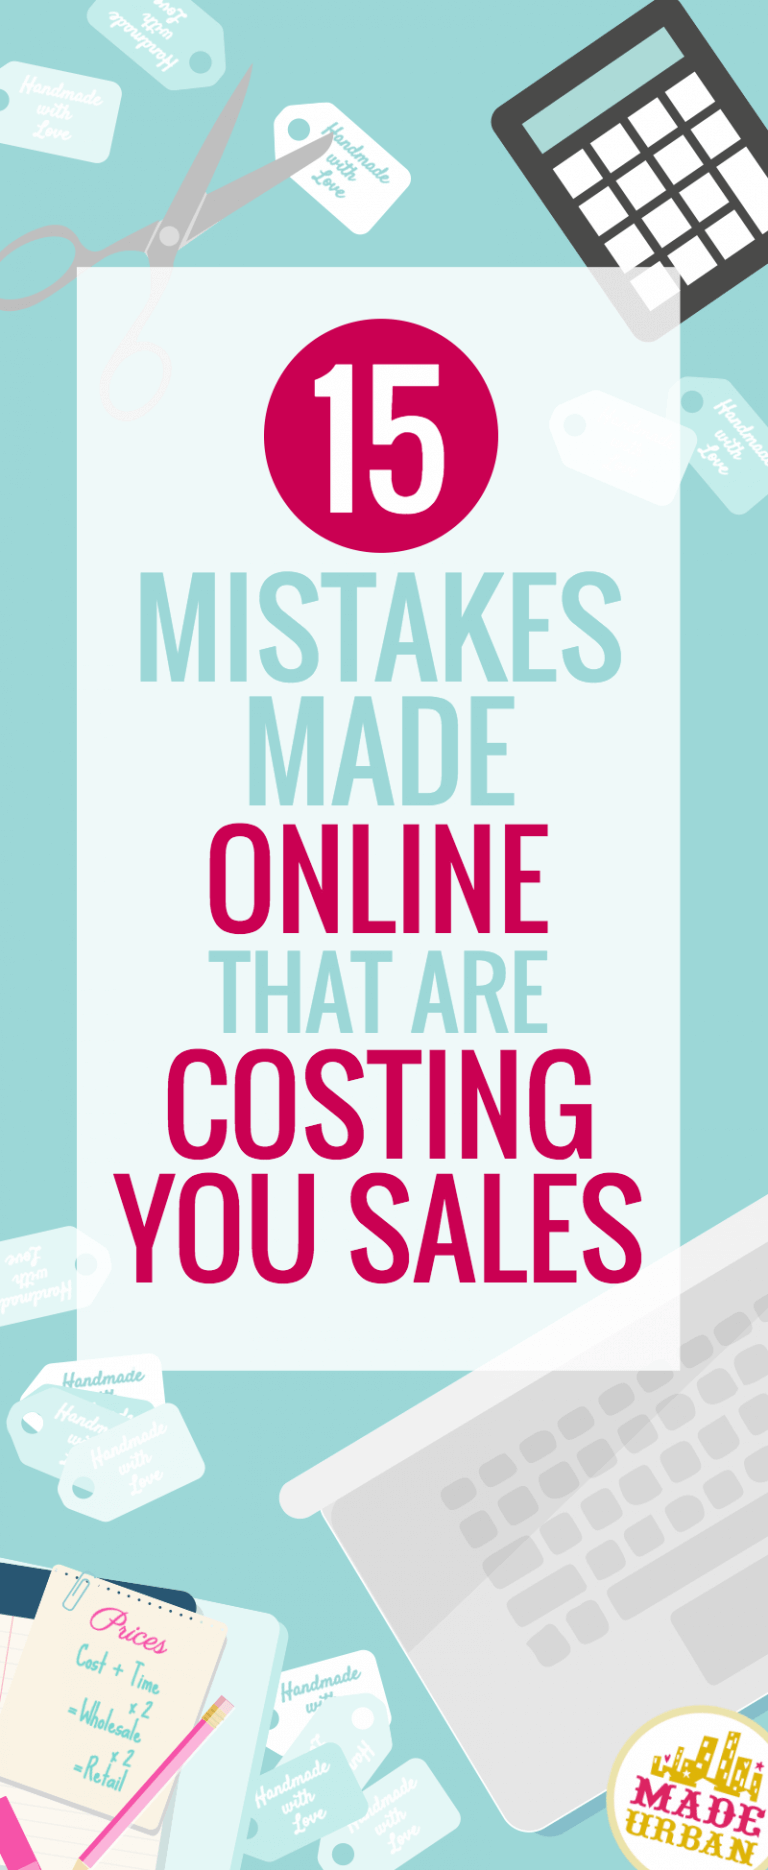 15 Online Mistakes Costing you Sales